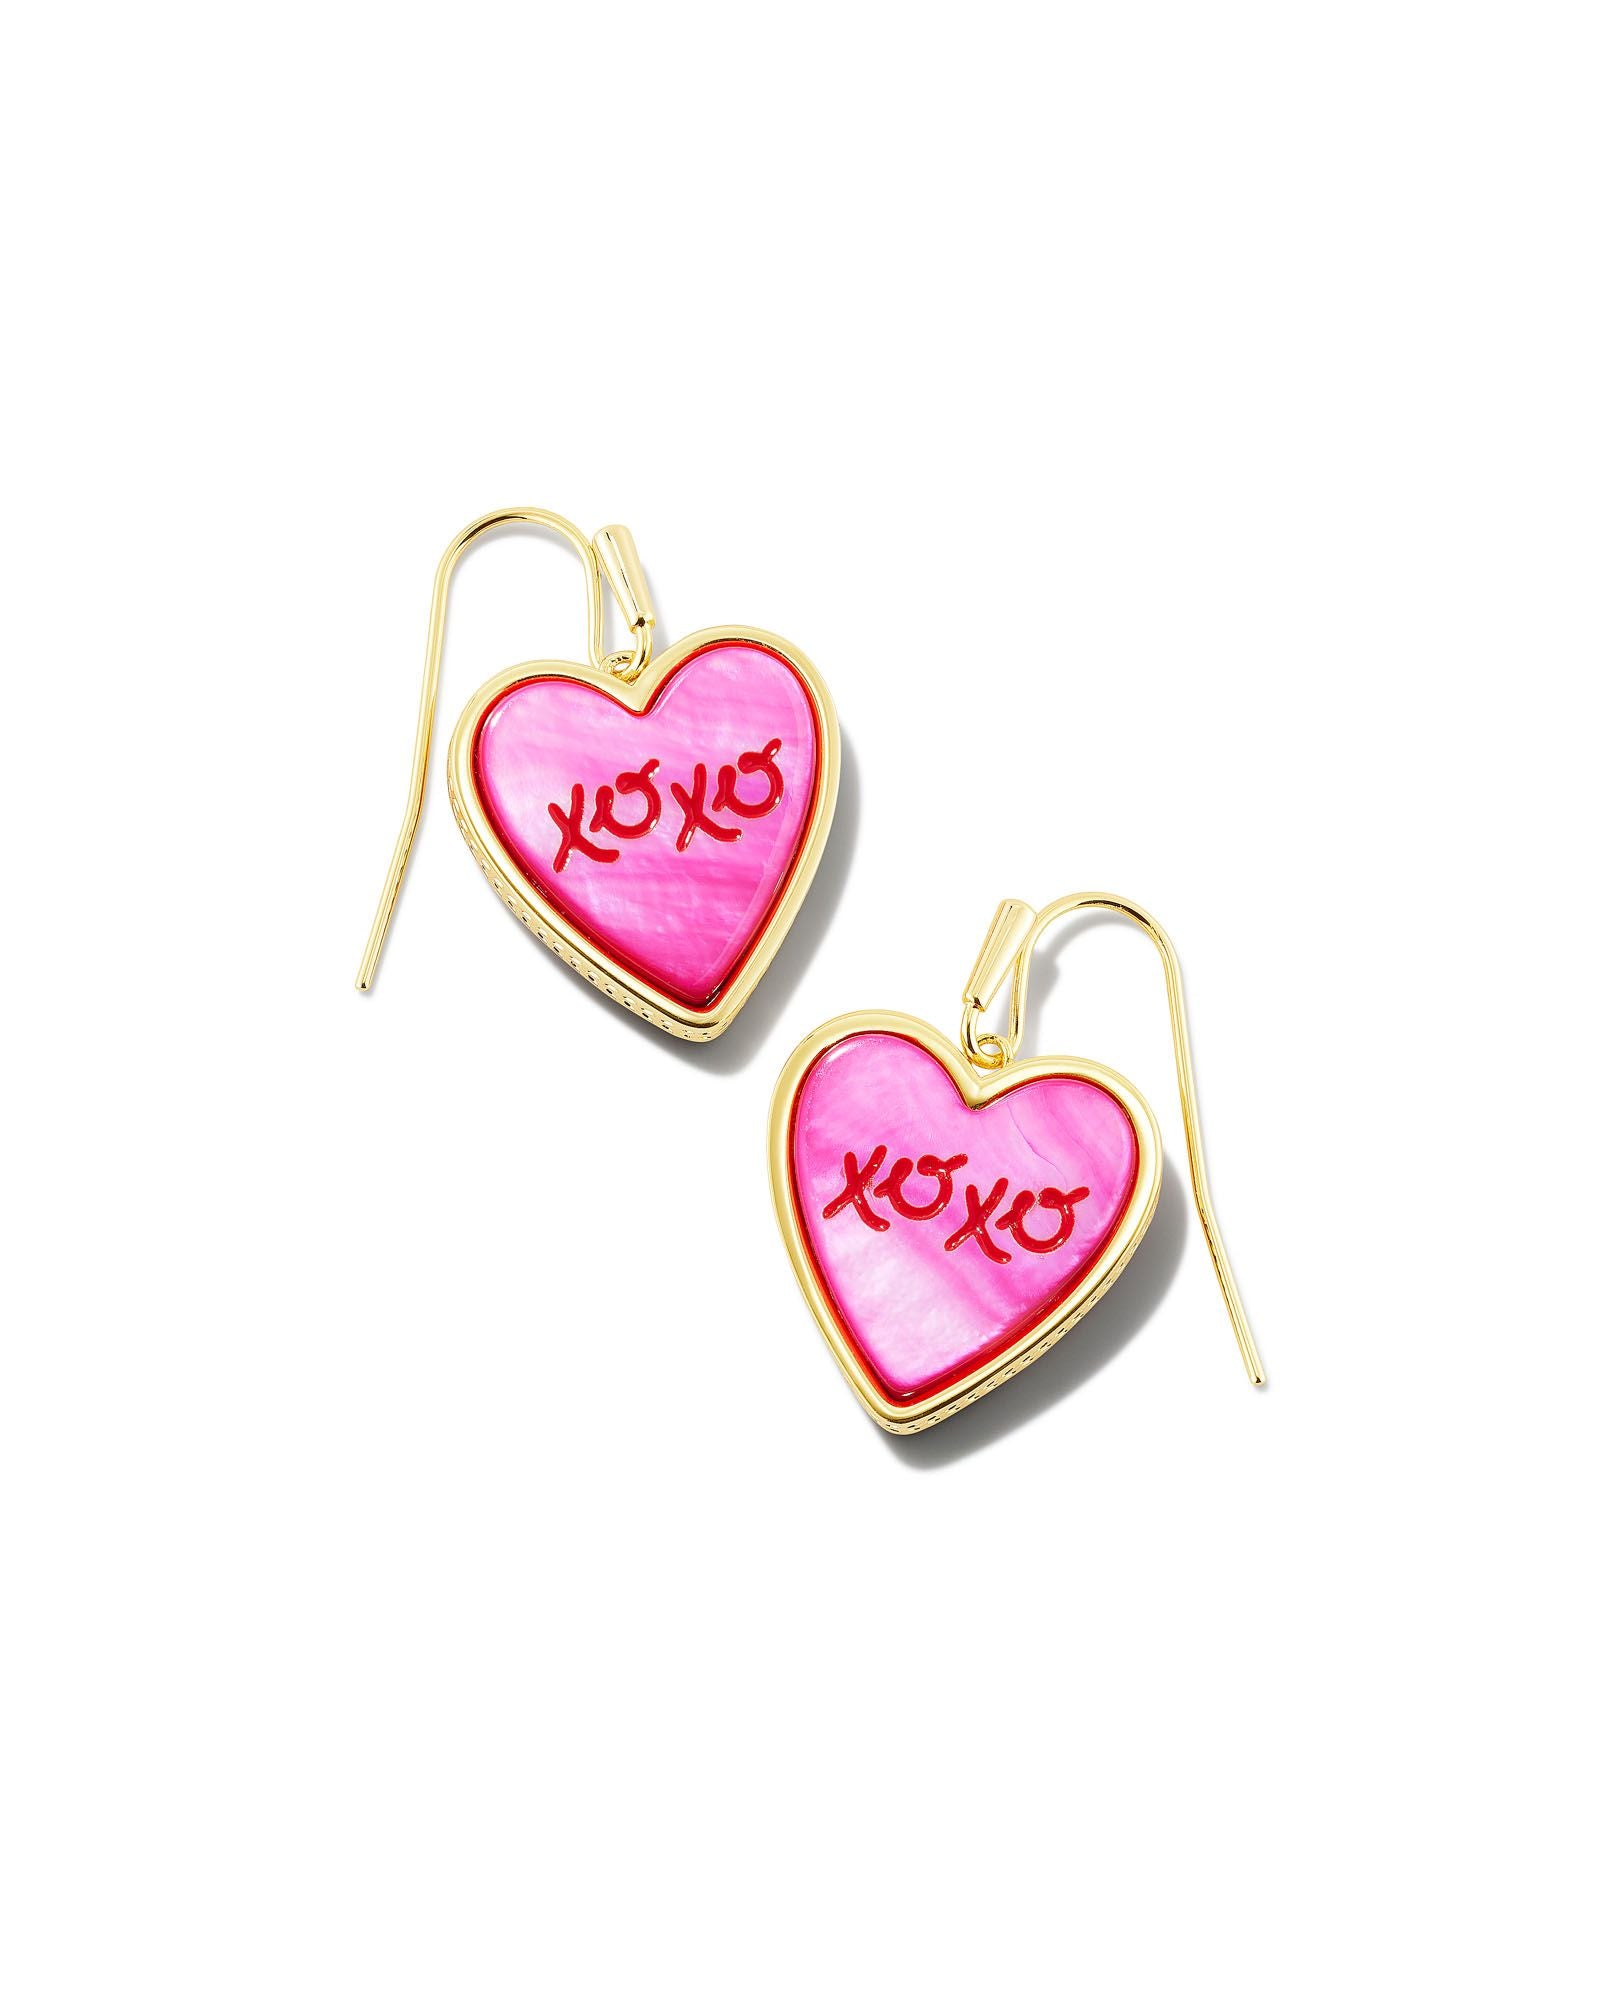 Kendra Scott | XOXO Heart Gold Drop Earrings in Hot Pink Mother of Pearl - Giddy Up Glamour Boutique